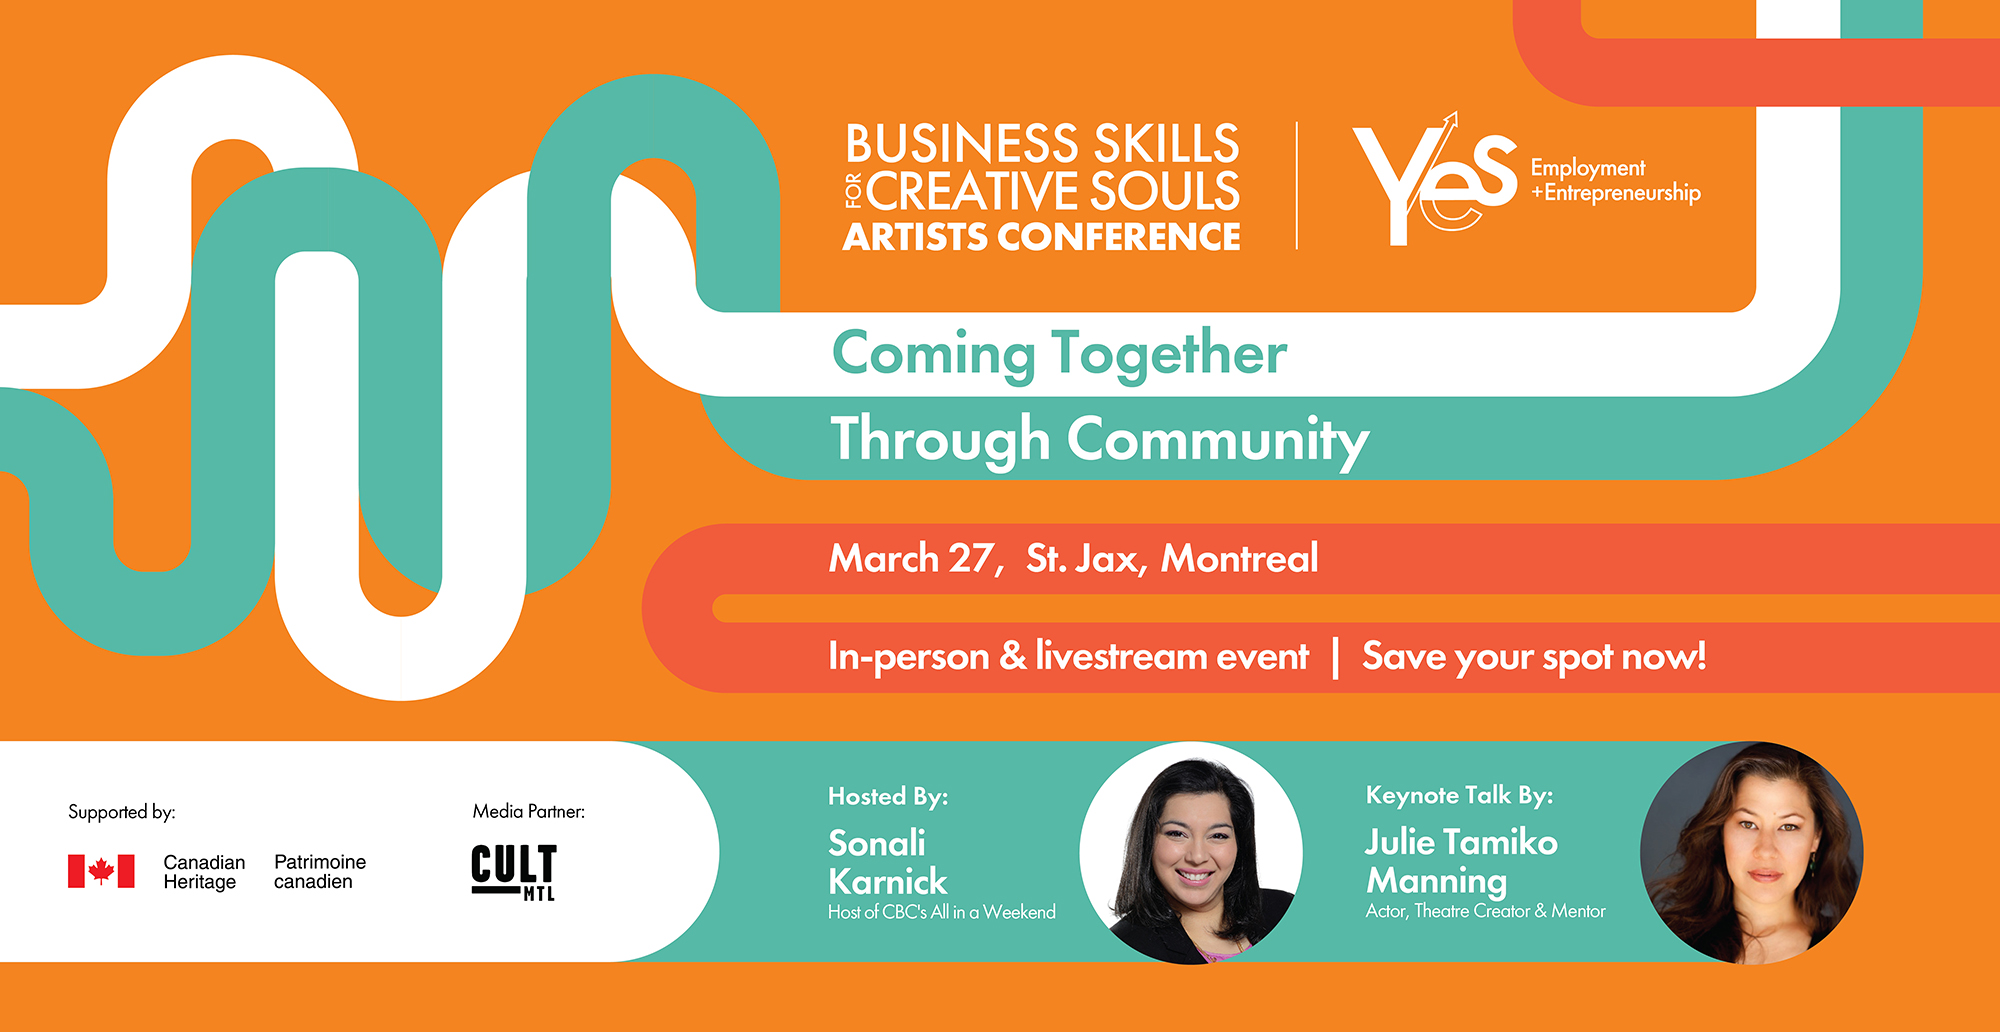 Business Skills for Creative Souls Artists Conference: Coming Together Through Community